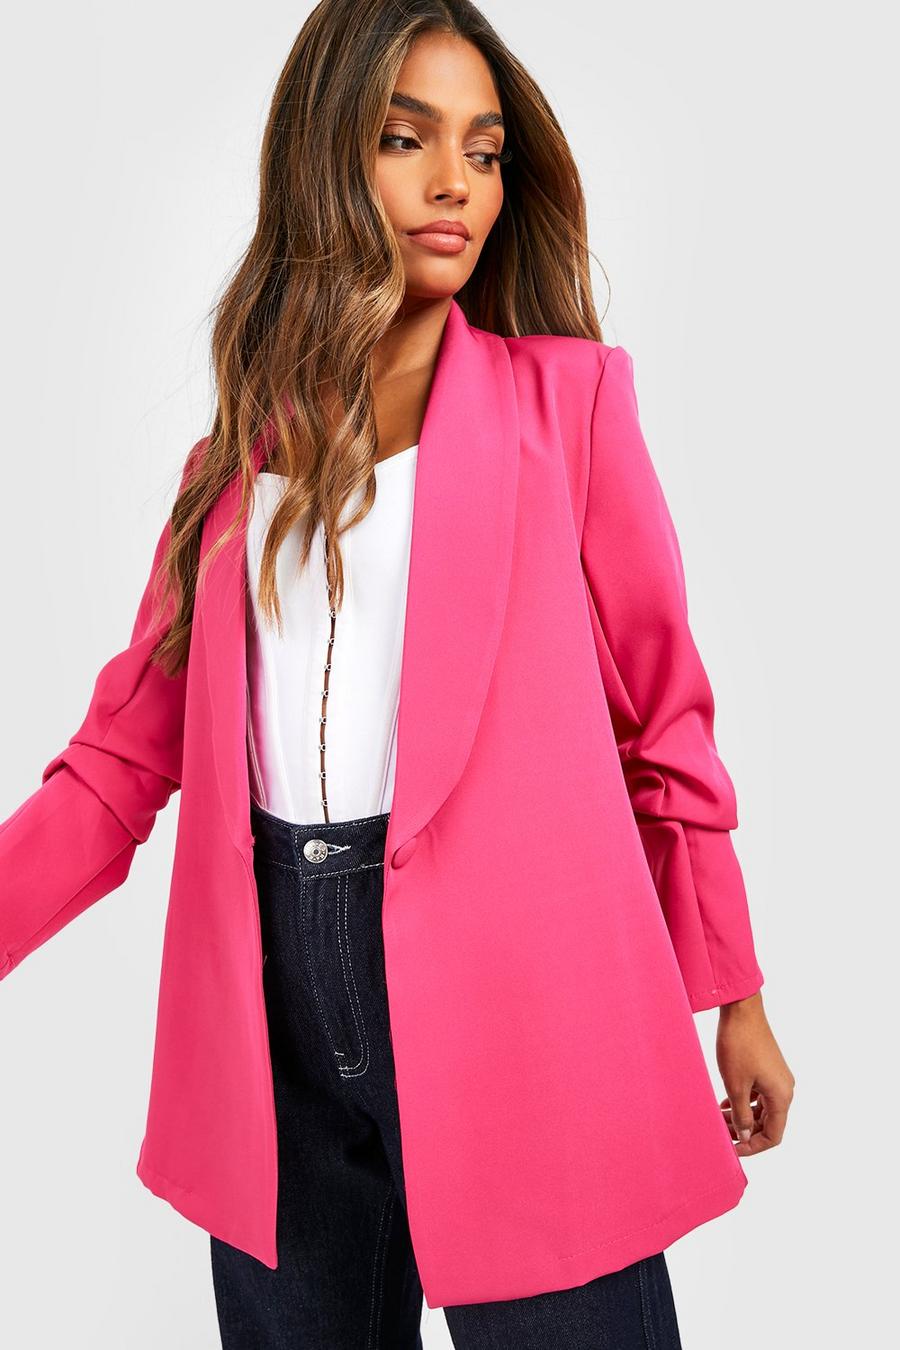 Hot pink Basic Woven Ruched Sleeve Plunge Lapel Blazer